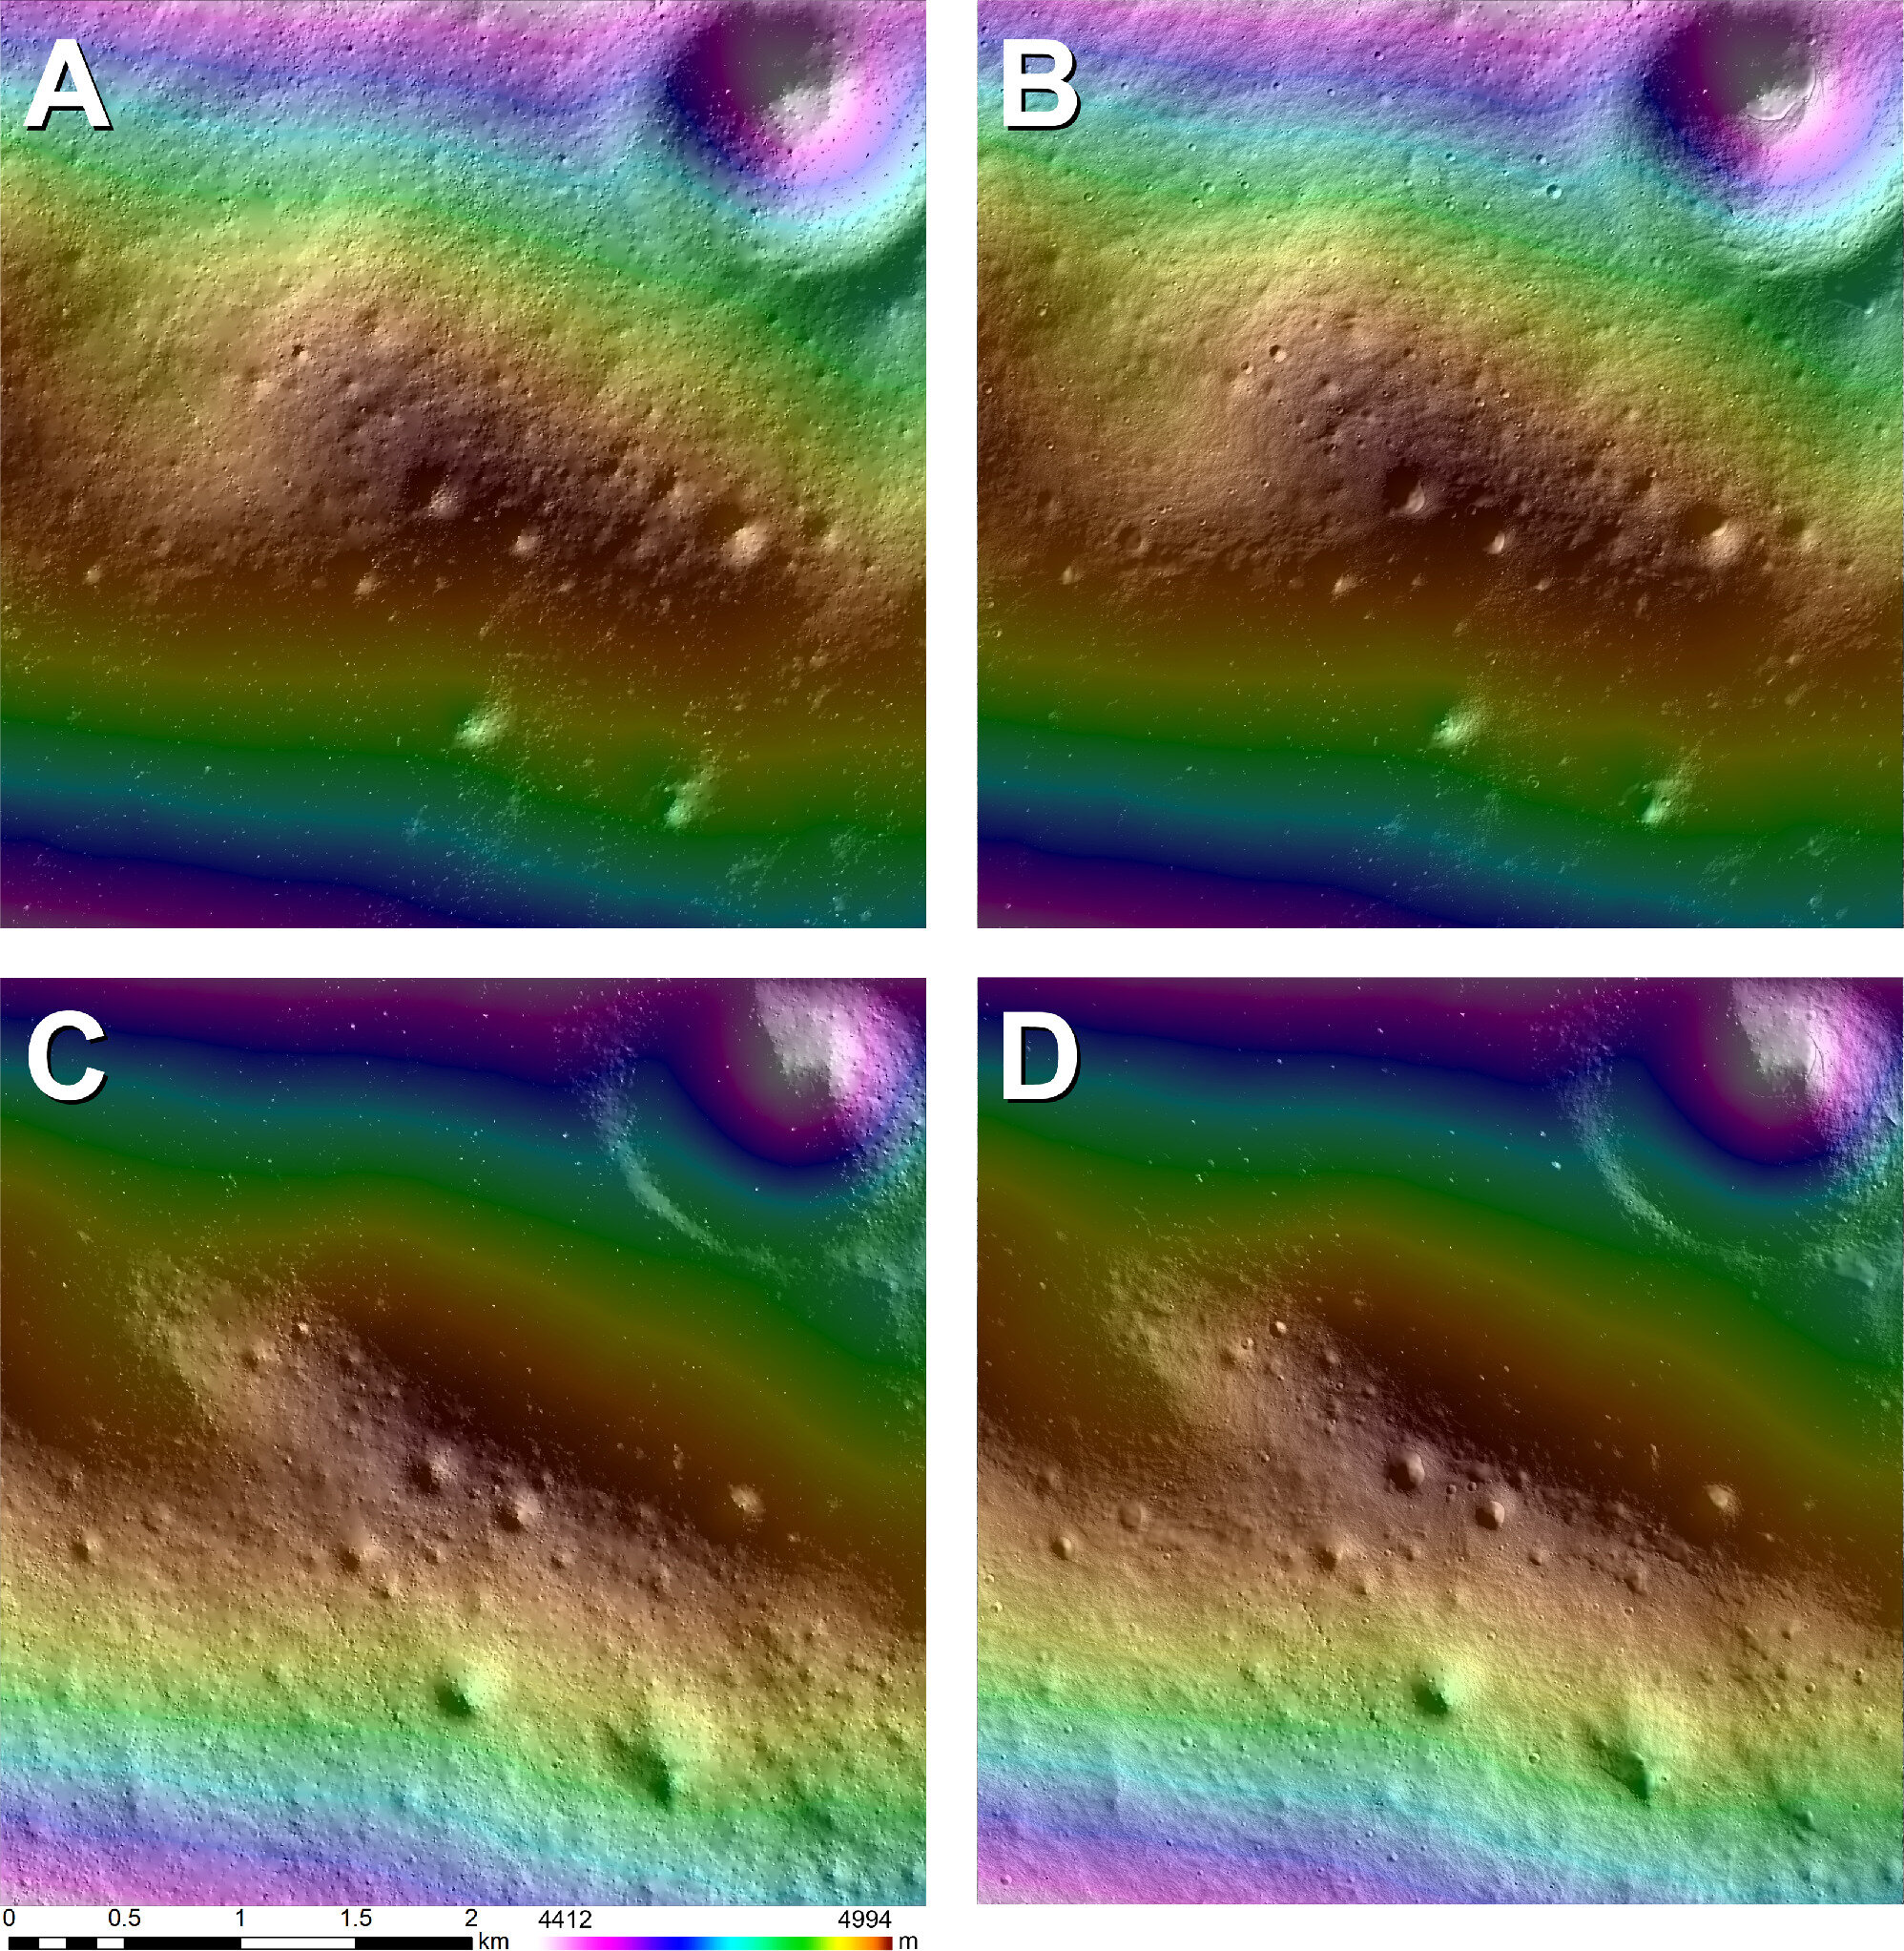 #New technique offers more precise maps of the moon’s surface